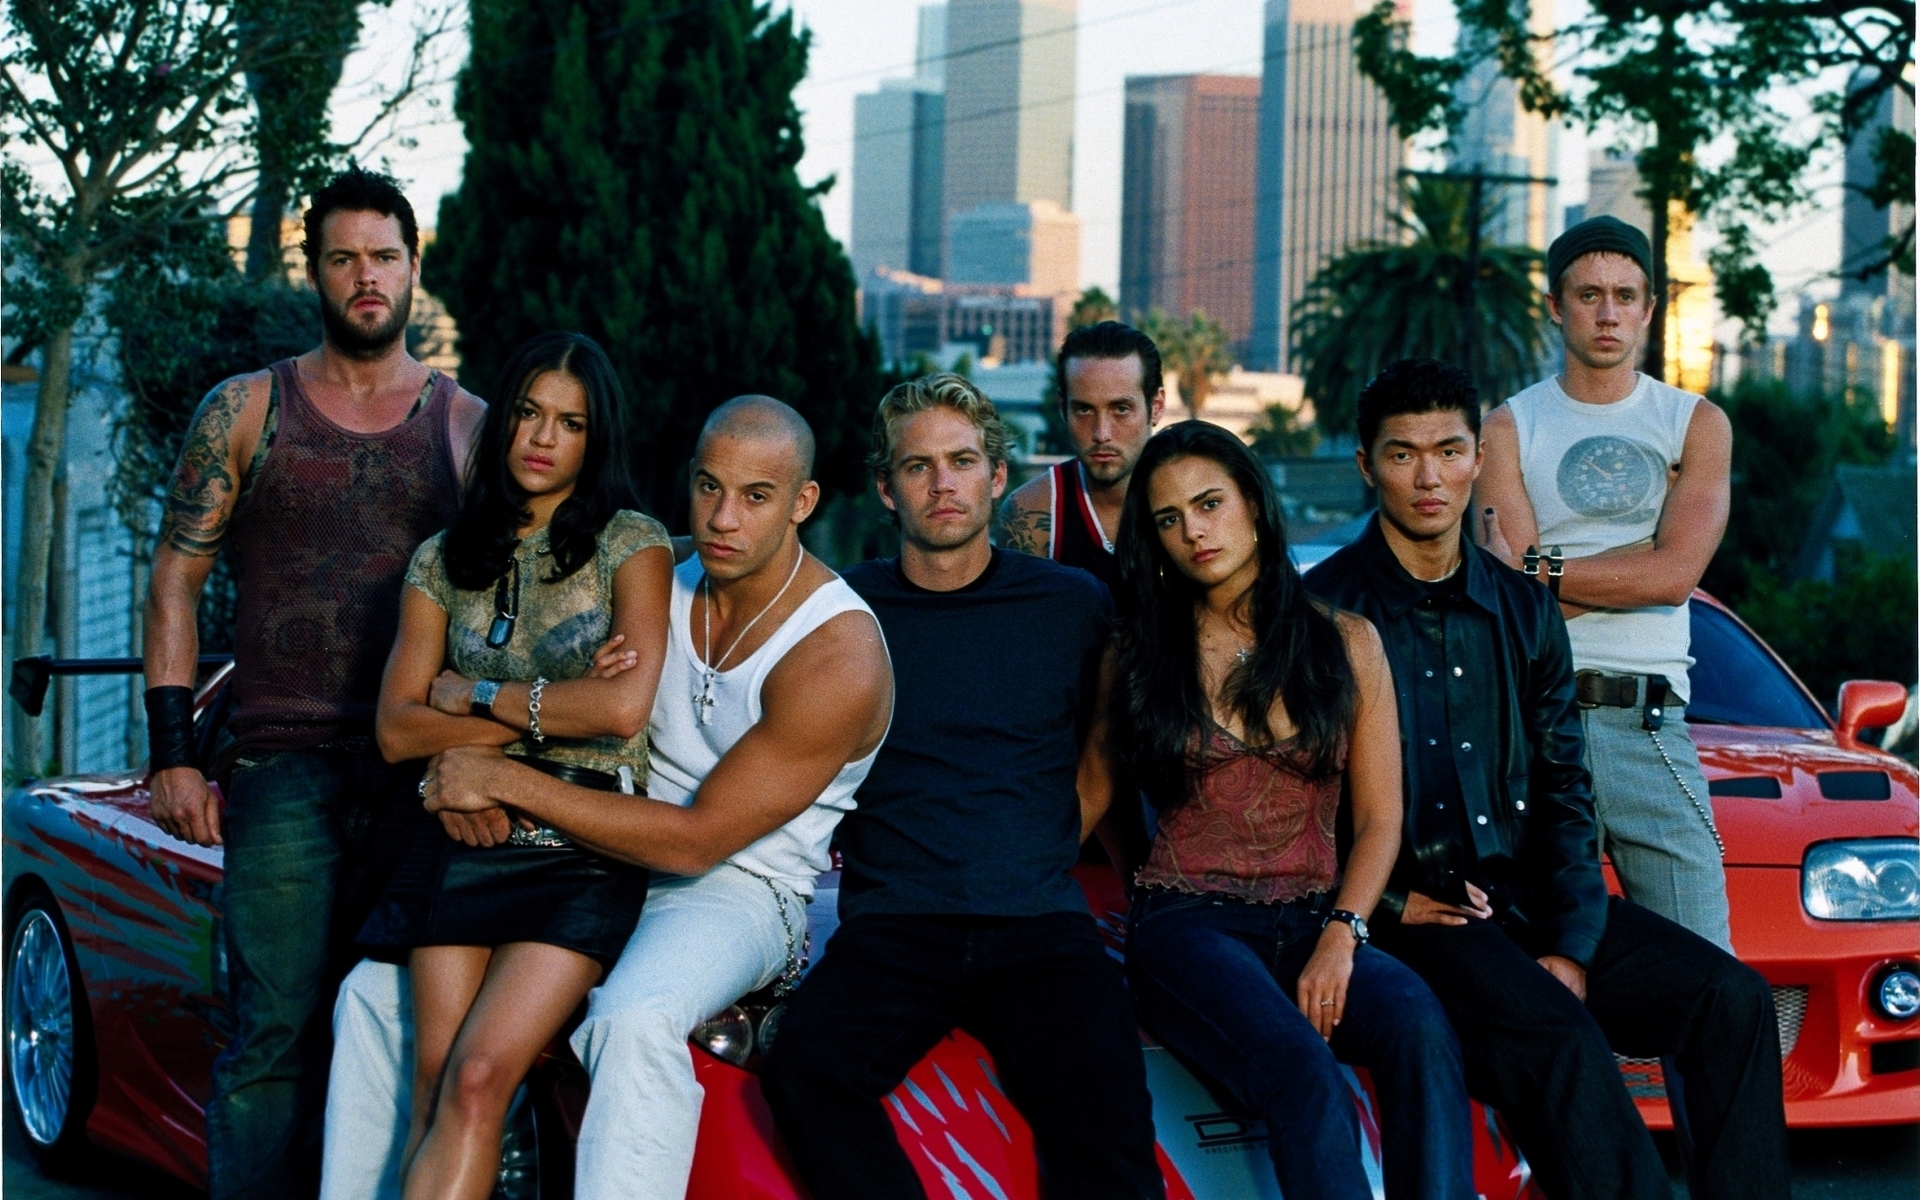 Brian O 039 Conner Chad Lindberg Dominic Toretto Jesse The Fast And The Furious Johnny Tran Jordana  1920x1200